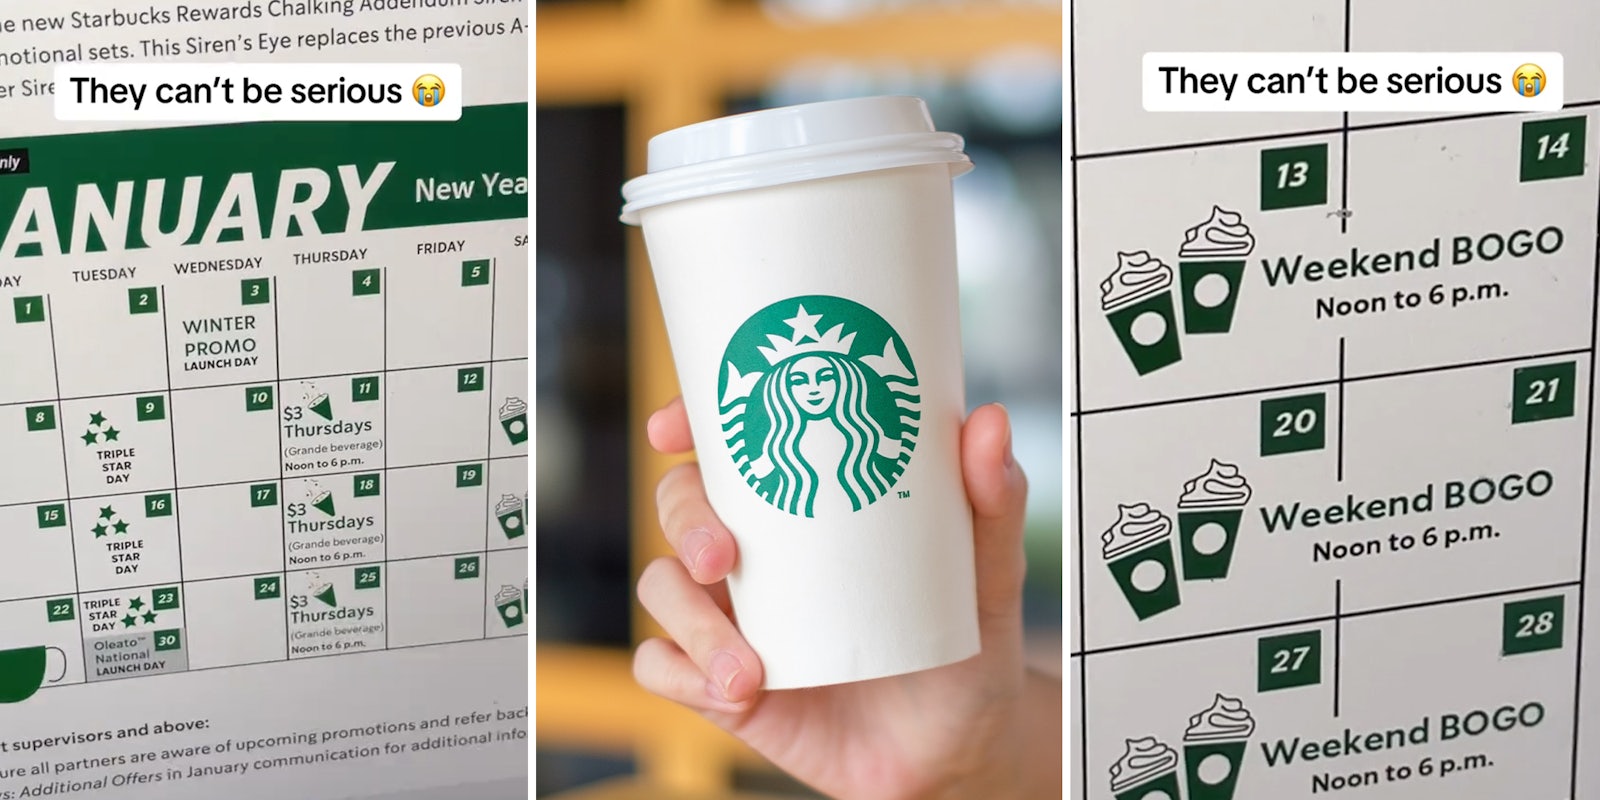 Starbucks barista shows schedule full of promotions like Weekend BOGO and $3 Thursdays